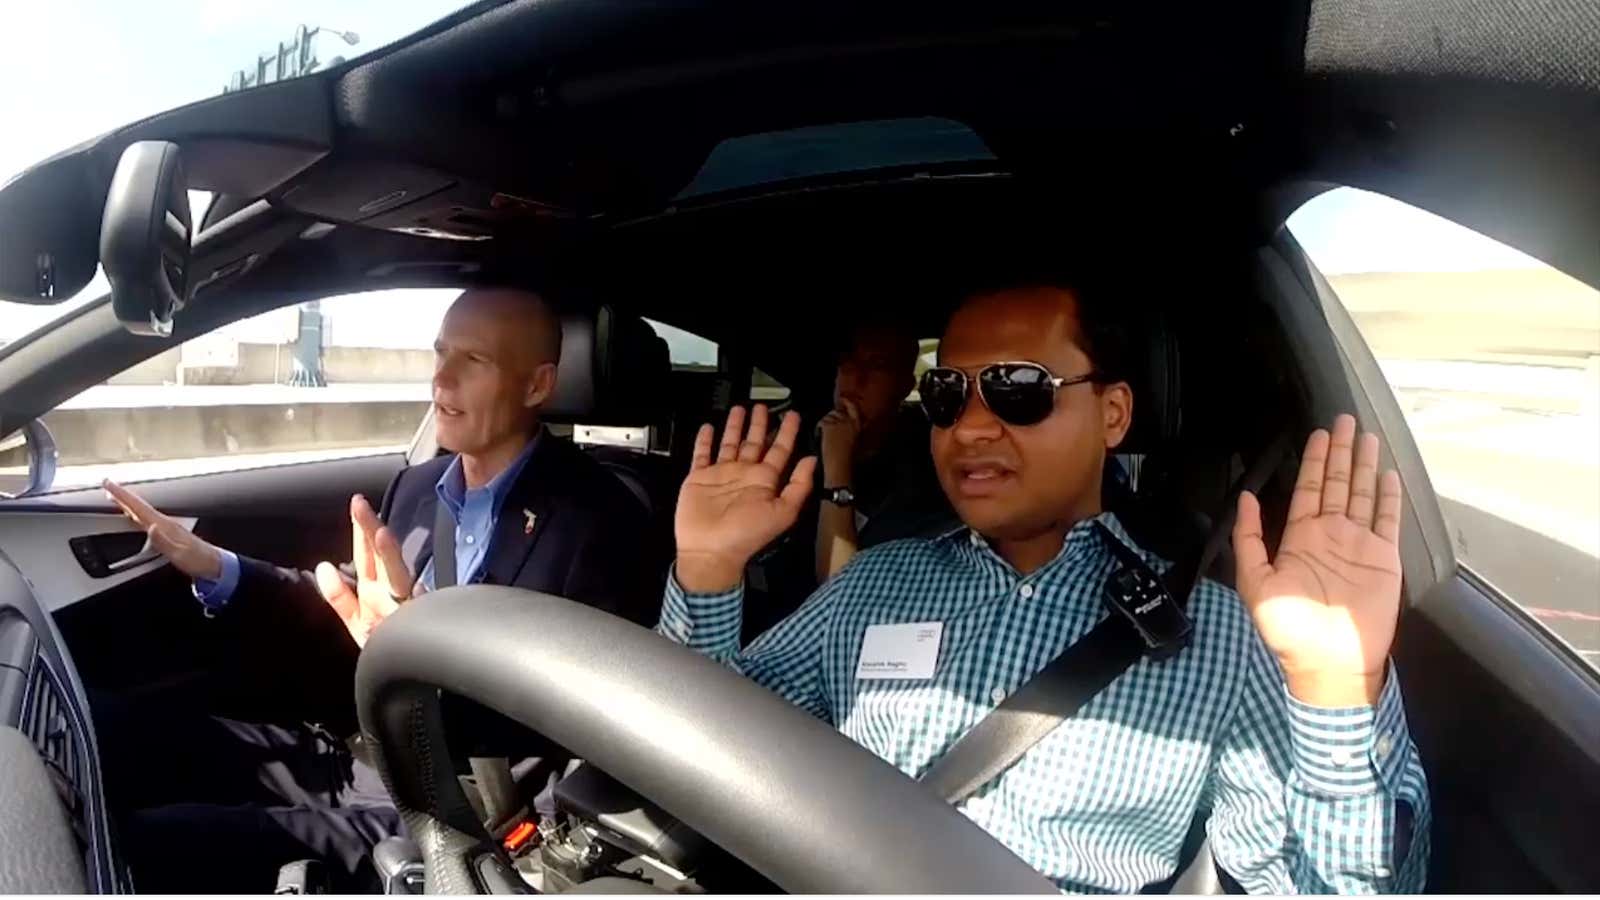 Florida’s Governor (L) is not so hands off about autonomous vehicles in his state.